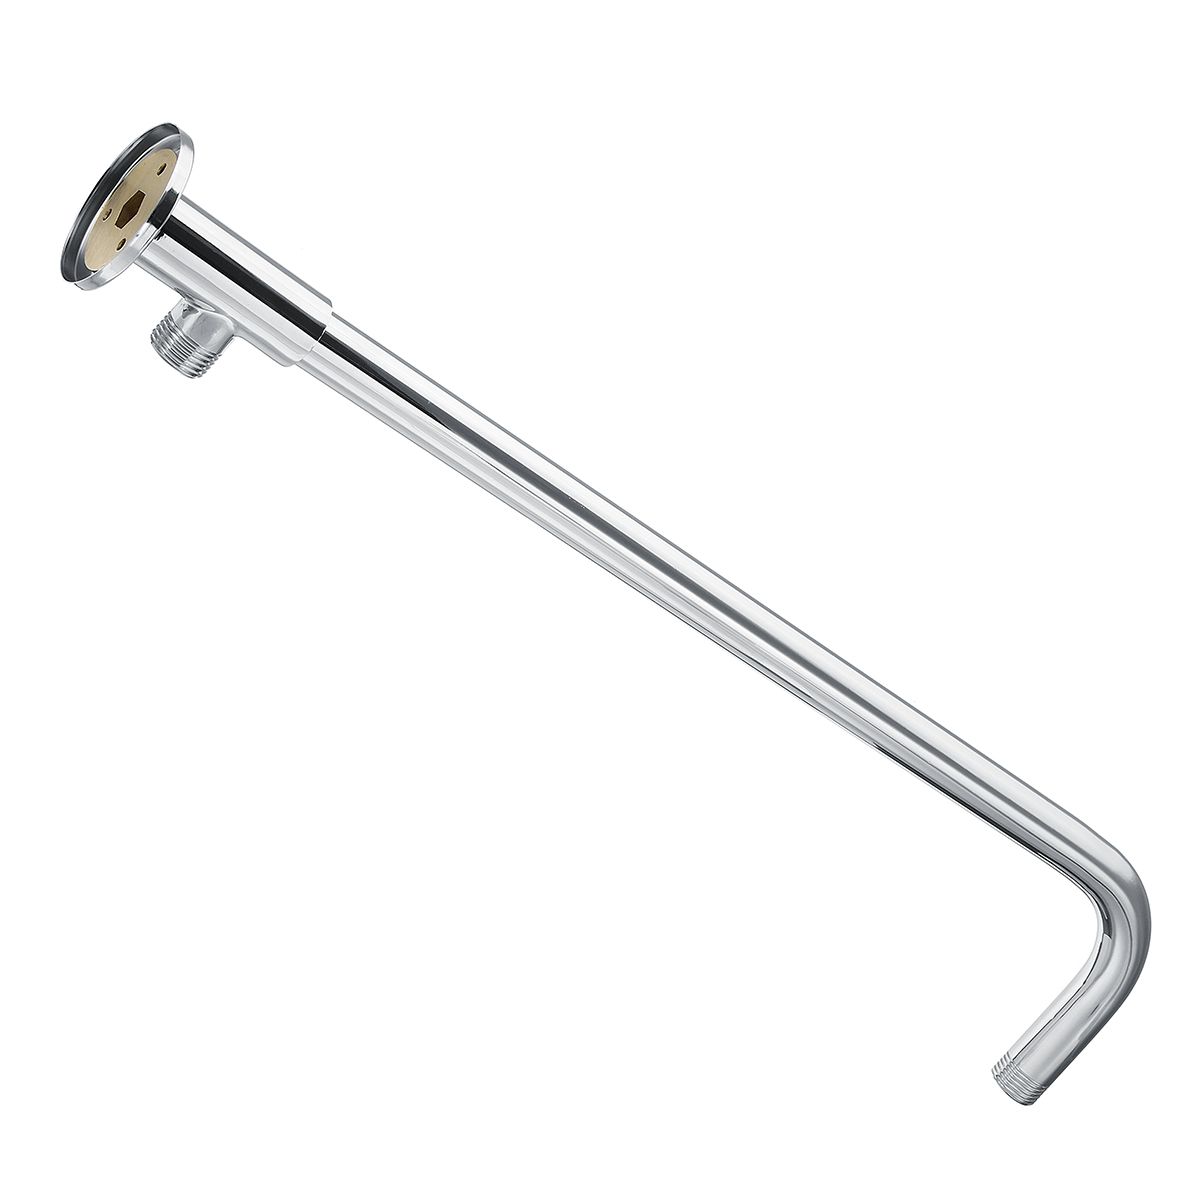 49cm-Stainless-Steel-Wall-Shower-Head-Extension-Pipe-Long-Arm-Mounted-Bathroom-1523906